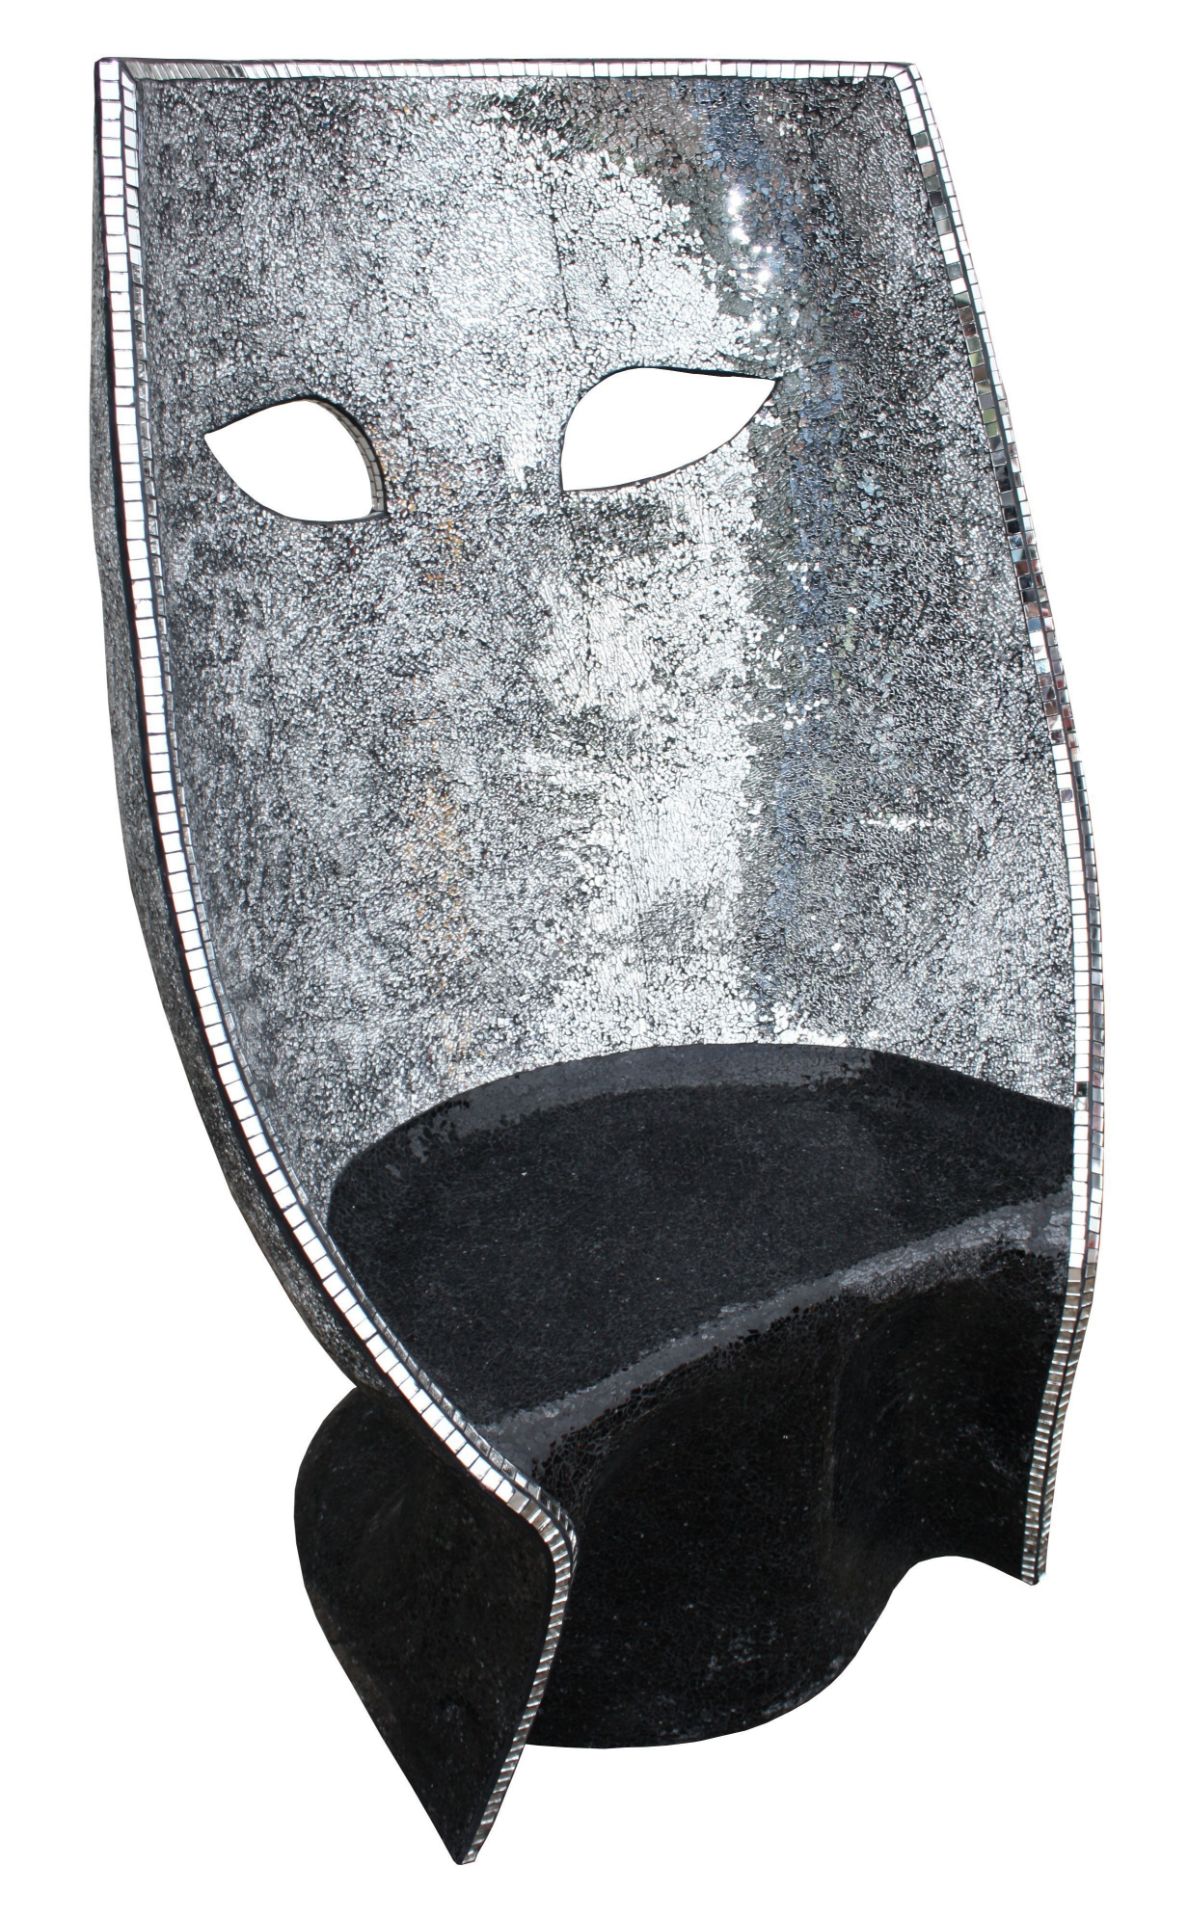 mosaik glass face chair      H:125 W:93 D:90 - Image 3 of 3